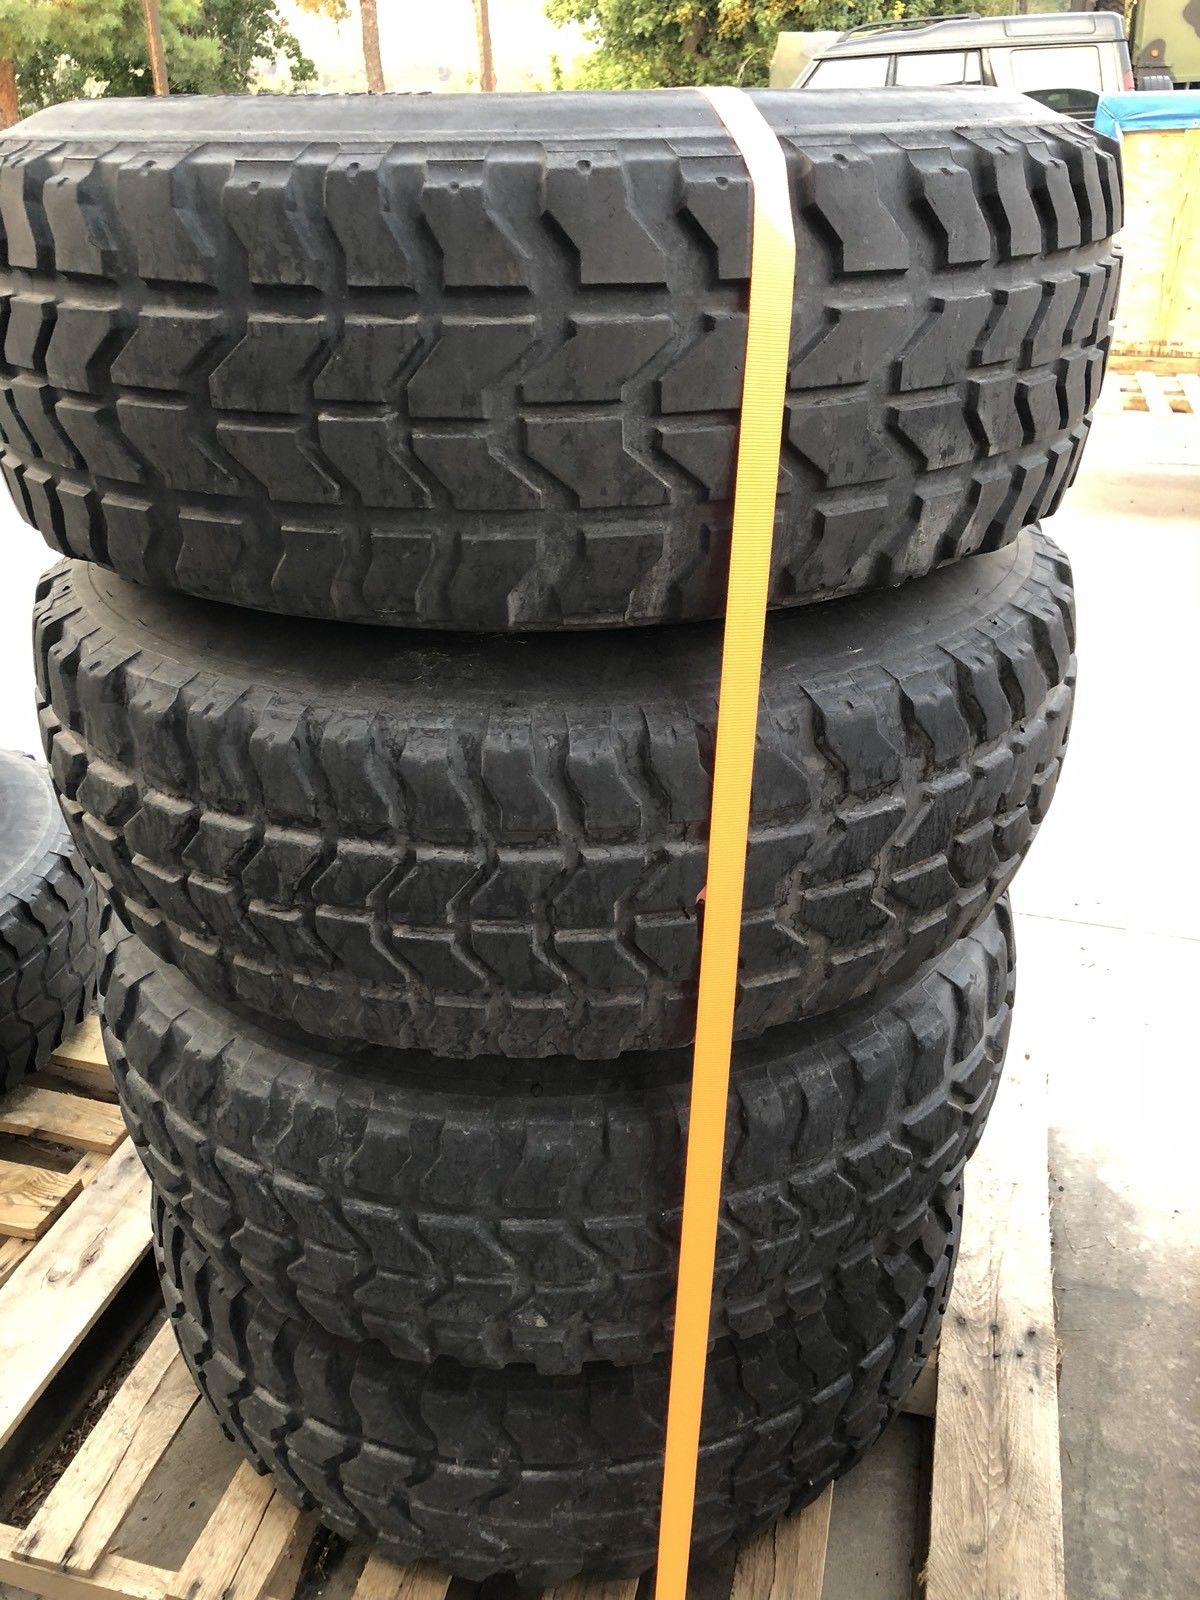 Humvee Tires - Matched Set of Four or Five - 37" - Goodyear mt Radials - Mounted on Rims - Includes Run Flat Inserts